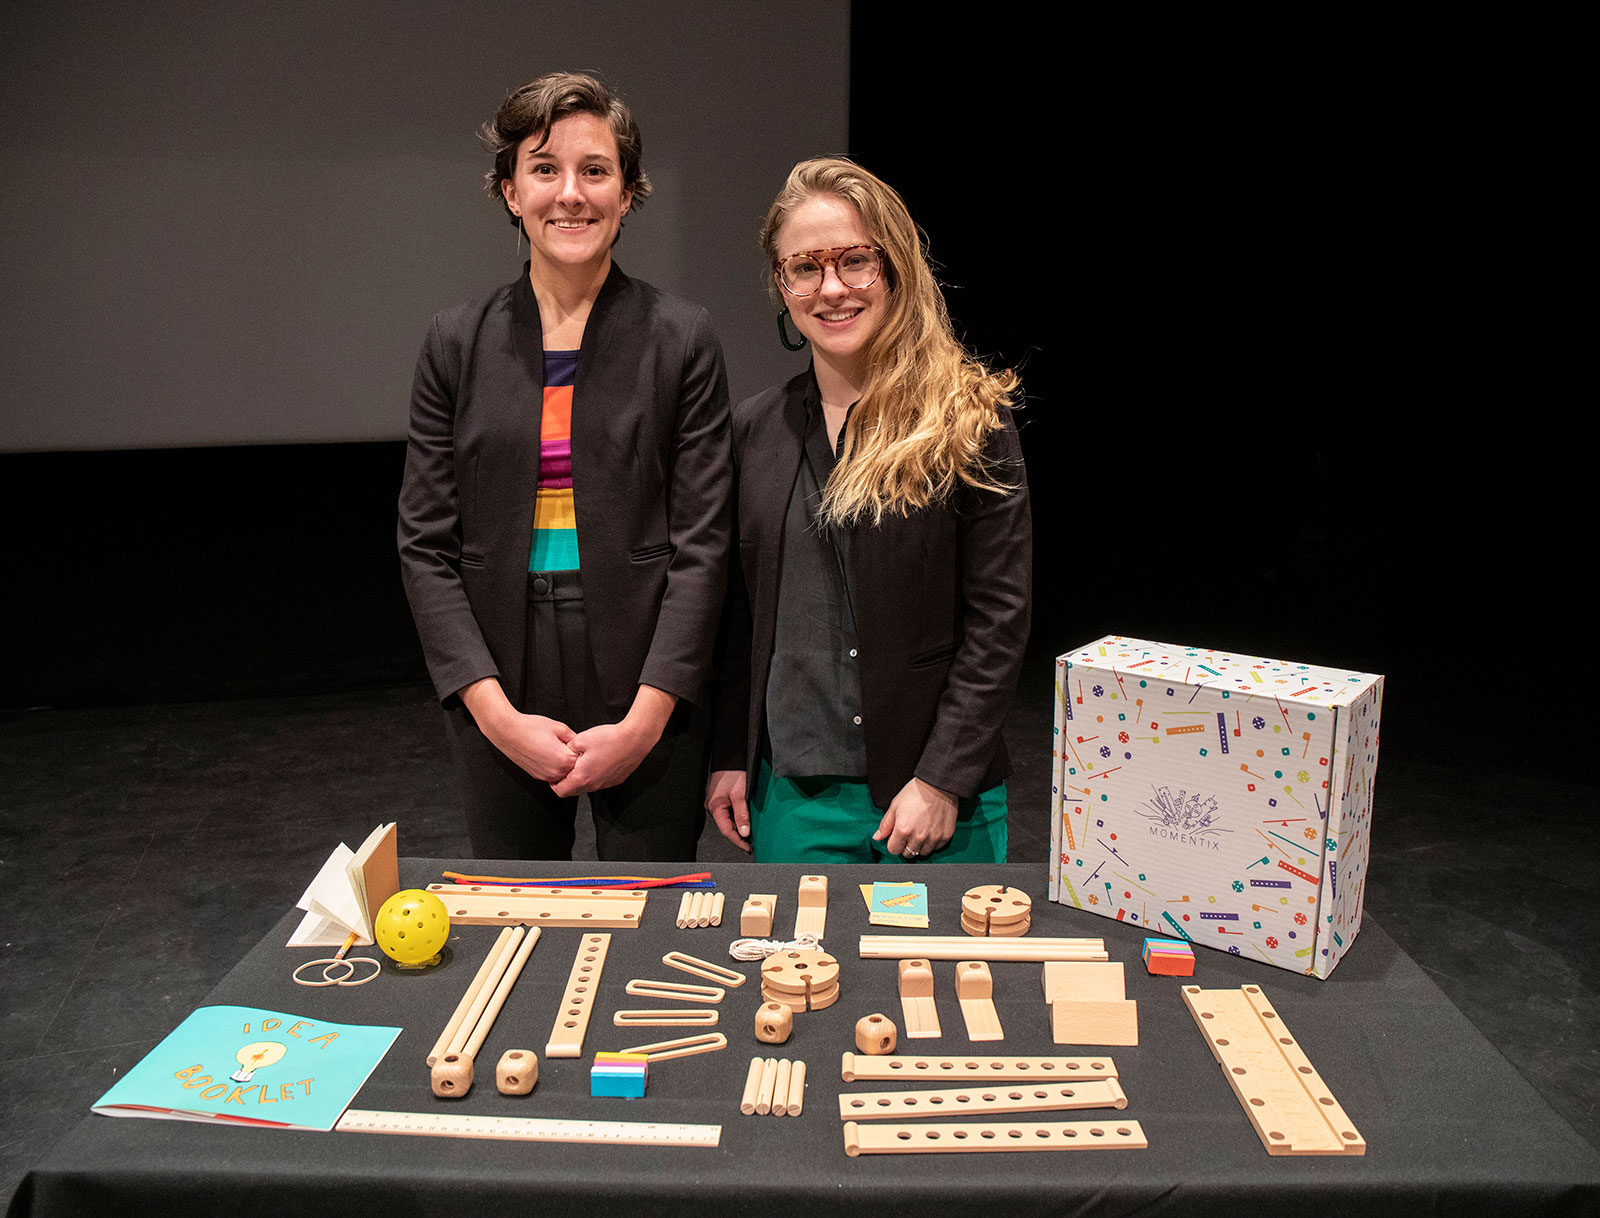 Team Momentix : Alana Aamodt '18 and Anna Gilbertson '19 Four teams competed in the final round of the Big Idea, a startup competition hosted by Innovation @ CC on Feb. 7m 2019 in Celeste Theater. The competing teams were SaFire, Advanced Water Sensing, Momentix and Infinite Chemistry. The teams competed for $25,000. First place went to Momentix while Advanced Water Sensing took second place. <span class="cc-gallery-credit"></span>